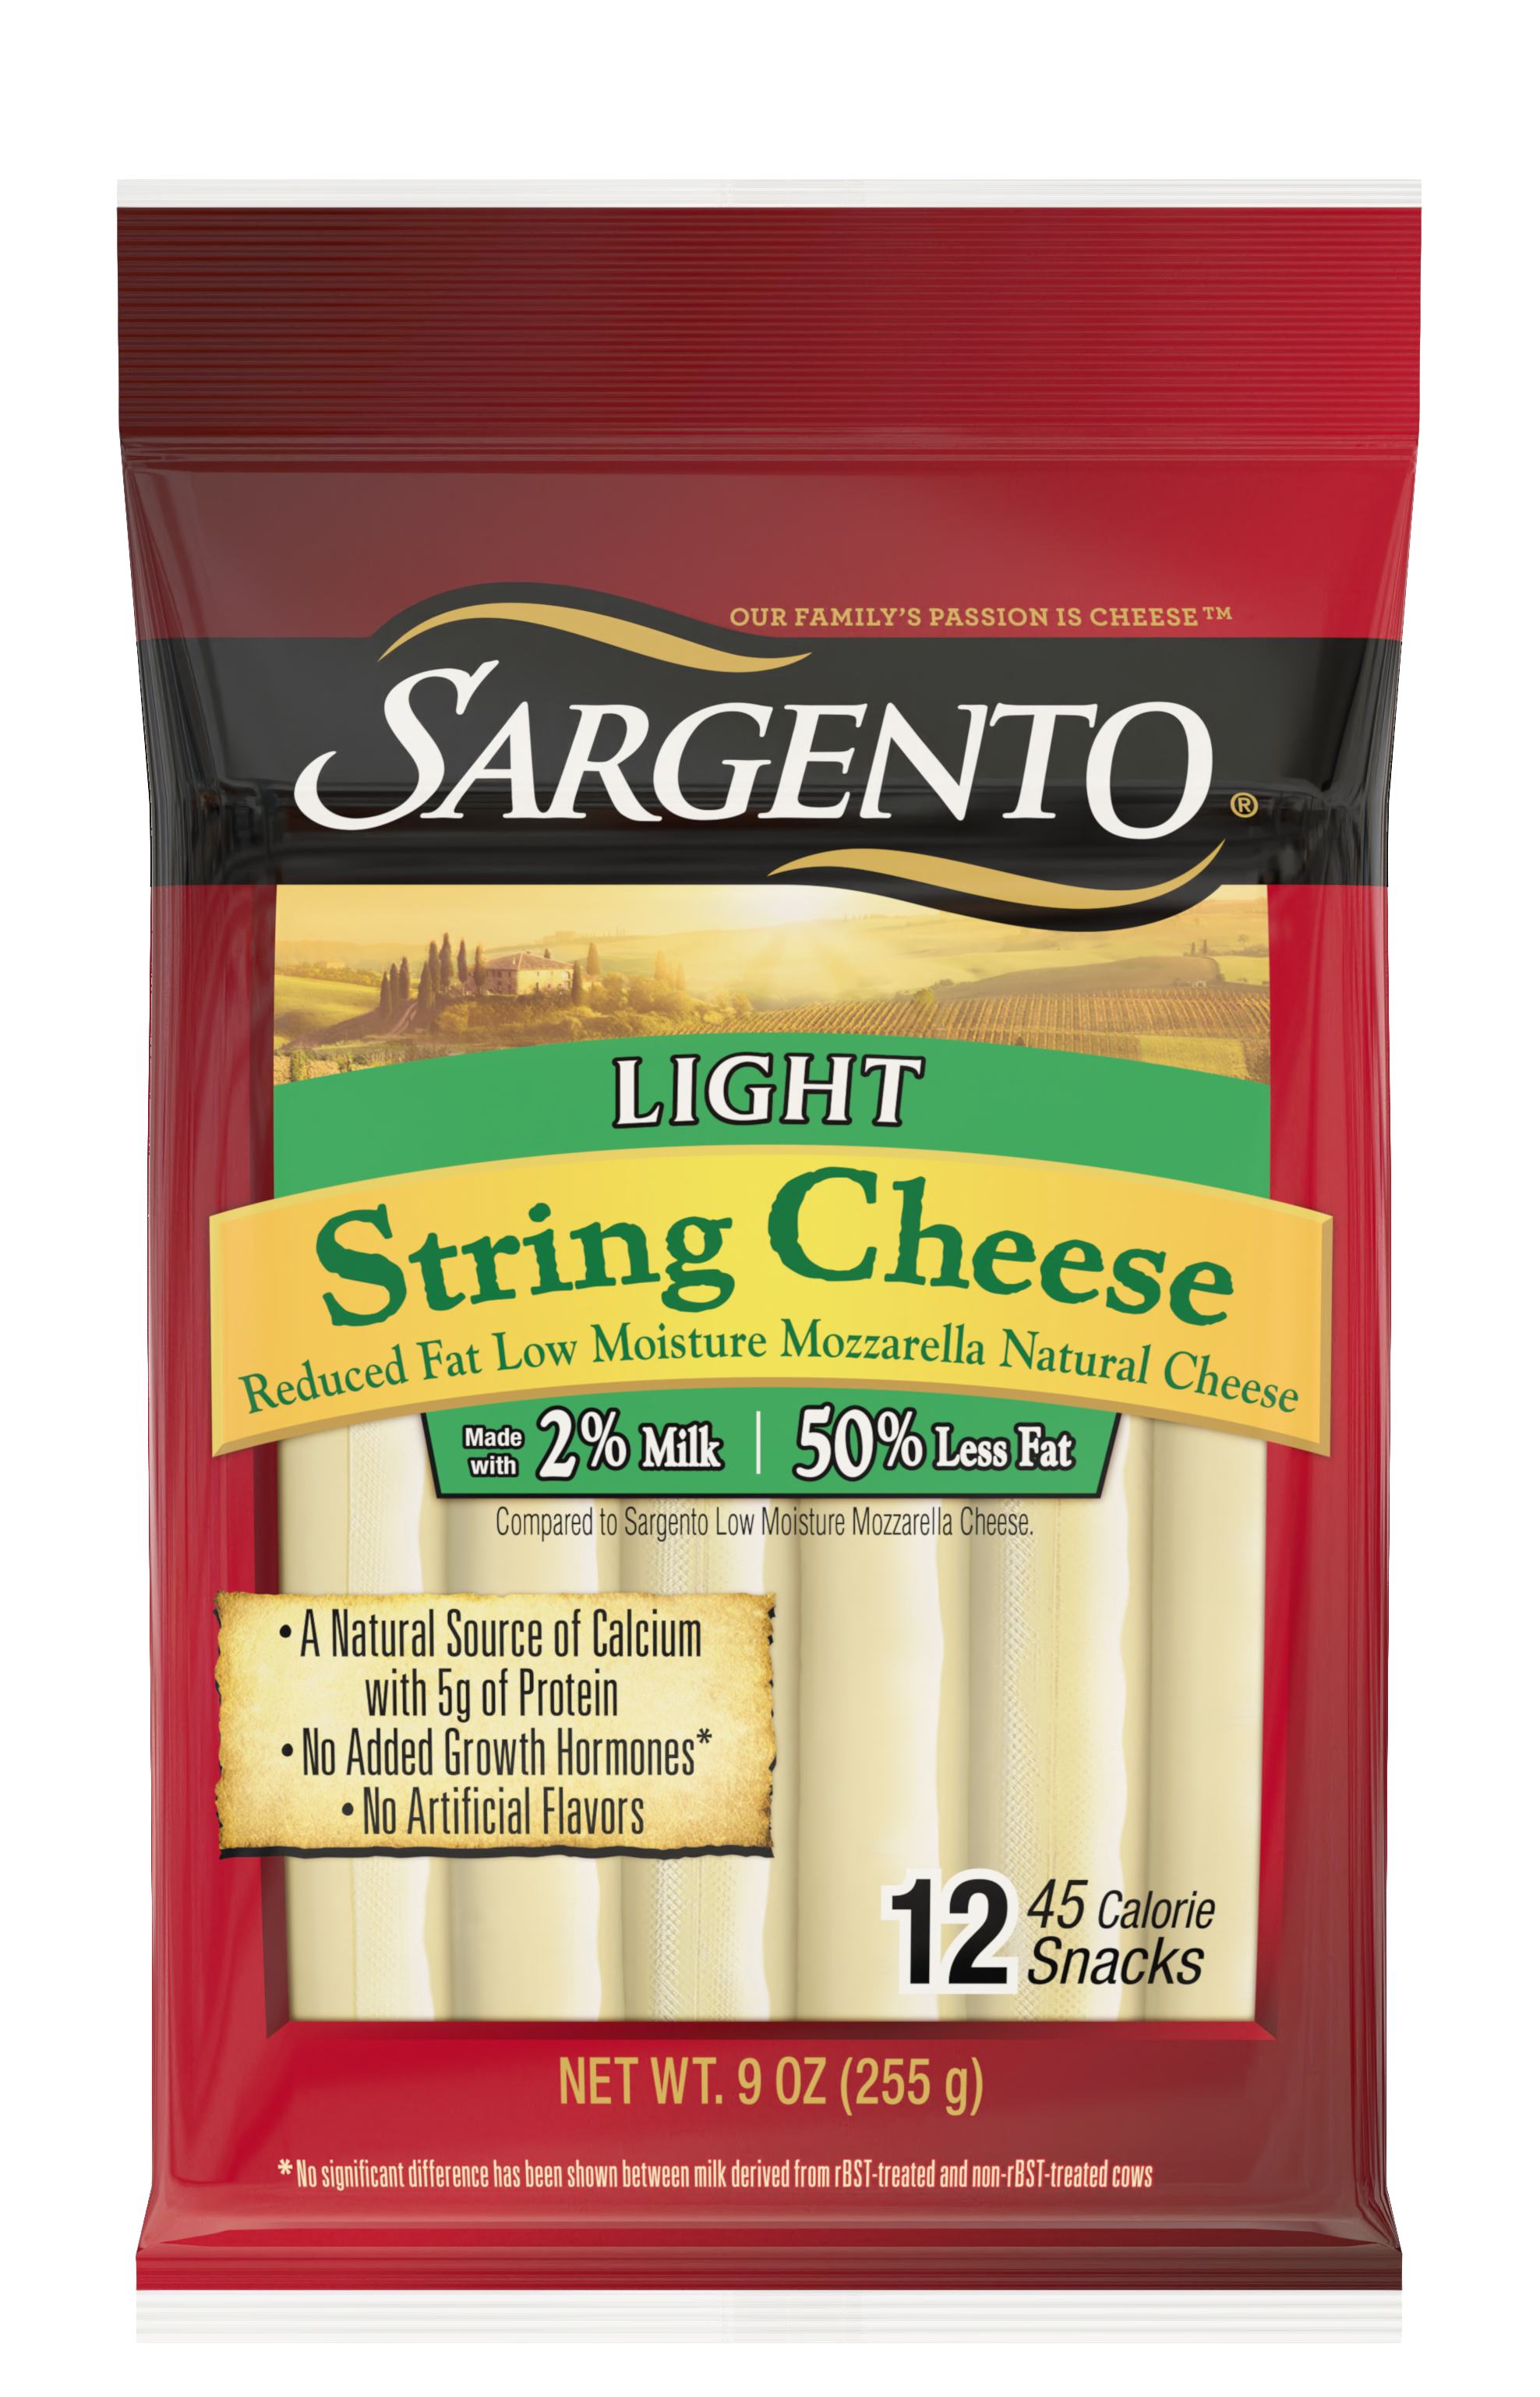 Sargento® Reduced Fat Low Moisture Part-Skim Mozzarella Natural Cheese Light String Cheese Snacks